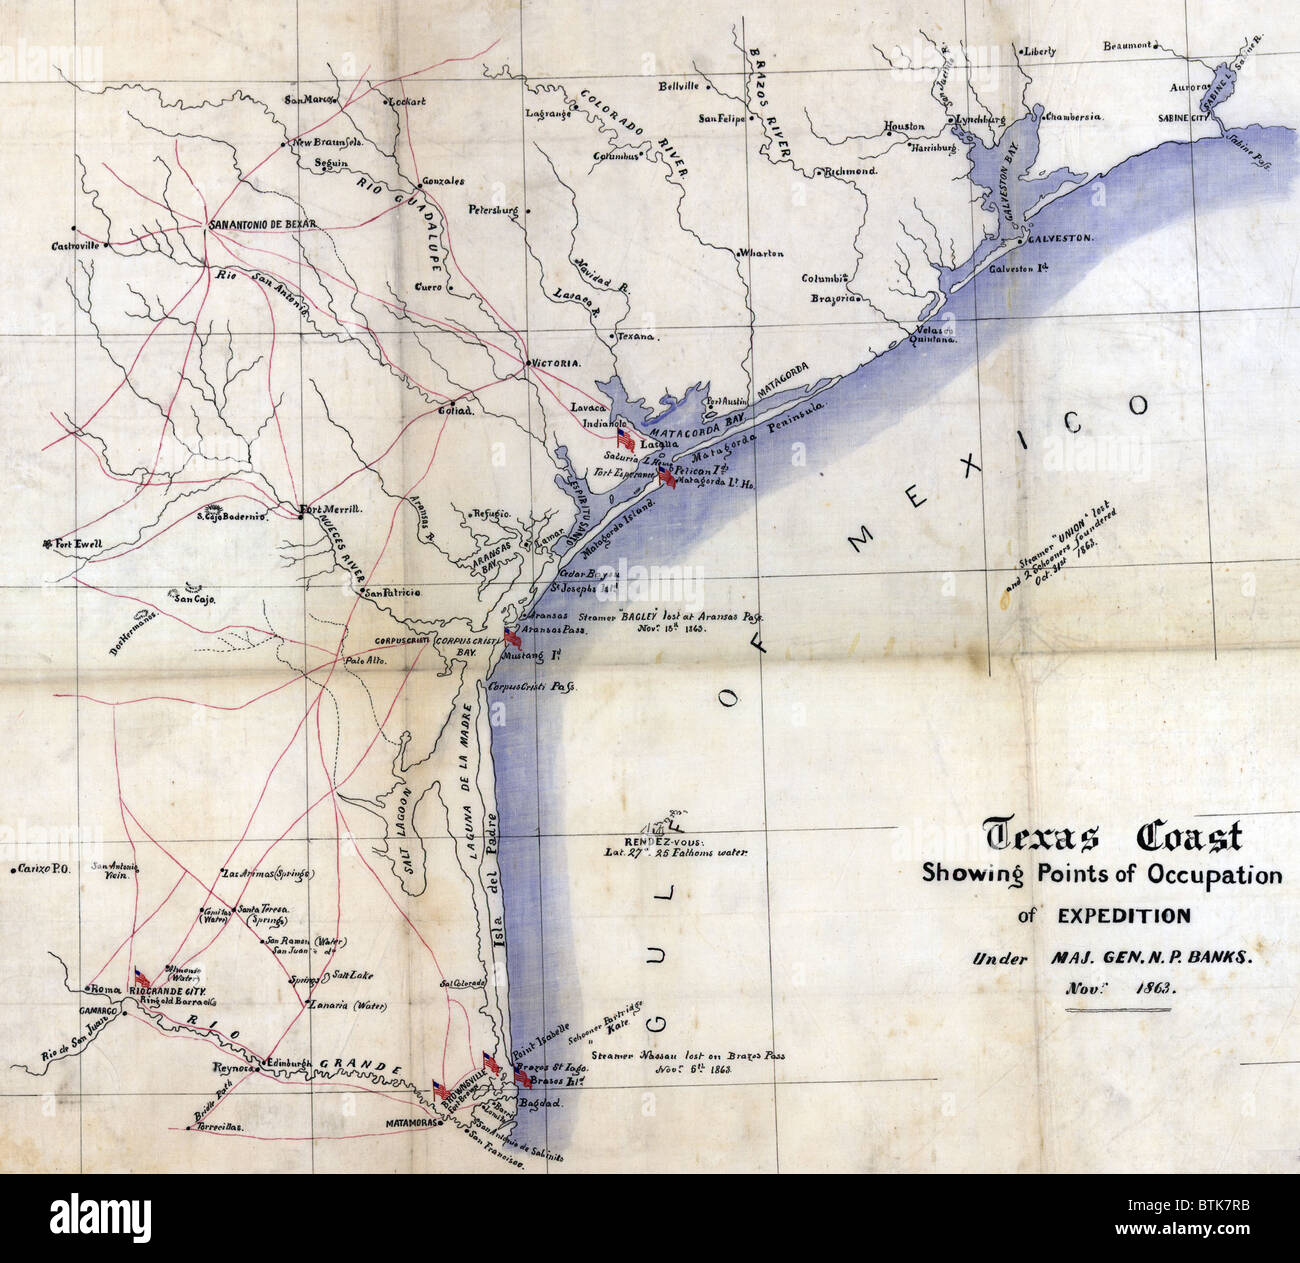 Texas Coast showing points of occupation of expedition under Maj. Gen. N.P. Banks. Shows towns, rivers, roads, selected shipwrecks, and Civil War 'Points of occupation' marked by U.S. flags Nov. 1863 Stock Photo